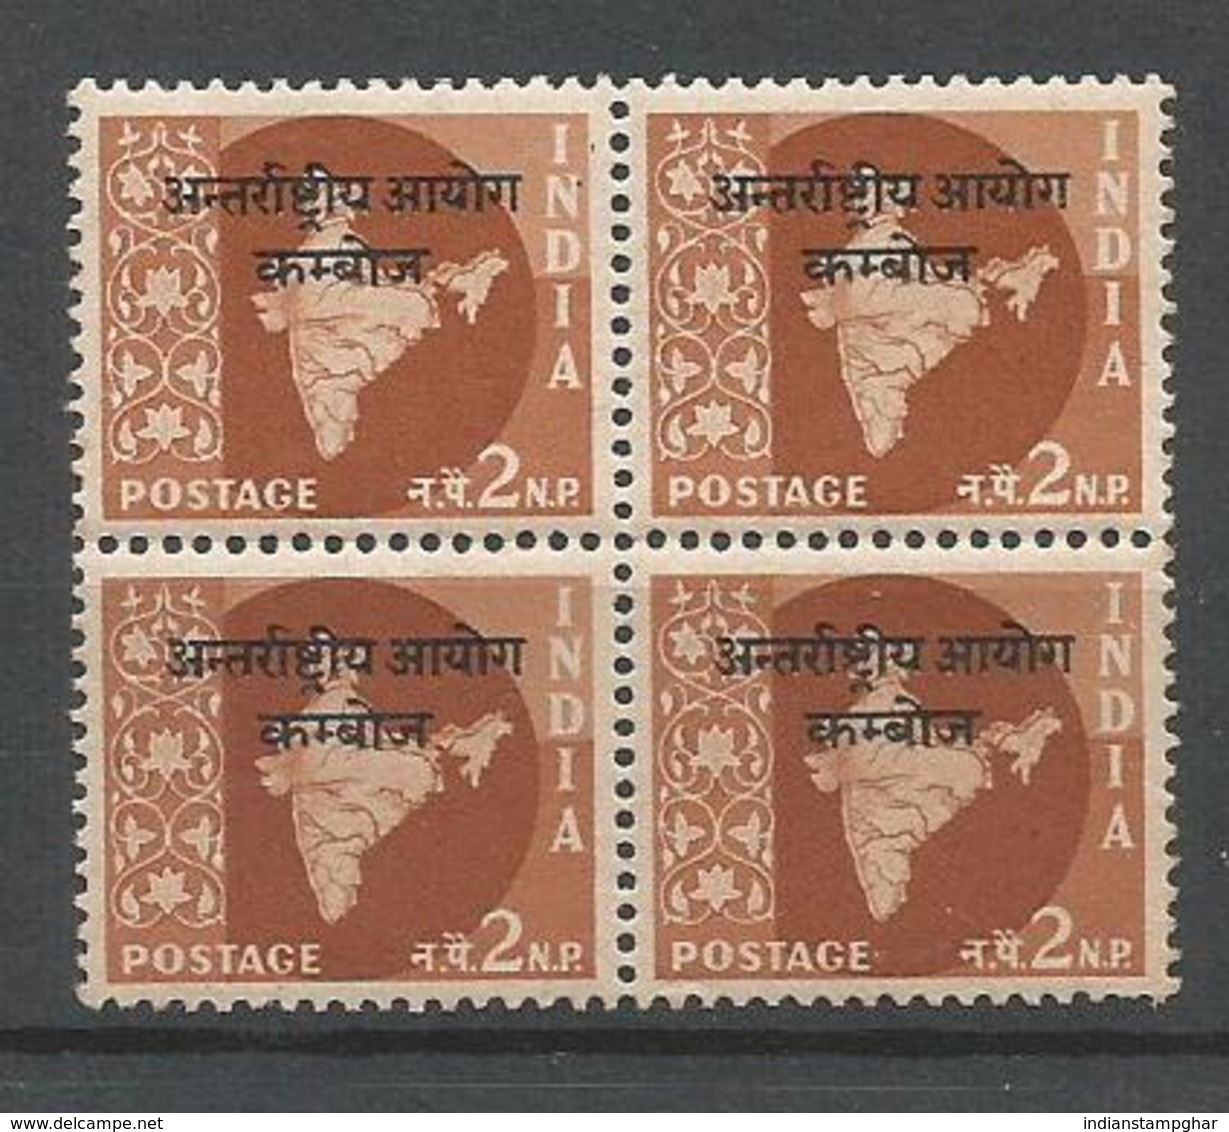 Cambodia Opvt. On 2np Map, Block Of 4, MNH 1962 Star Wmk, Military Stamps, As Per Scan - Franchise Militaire